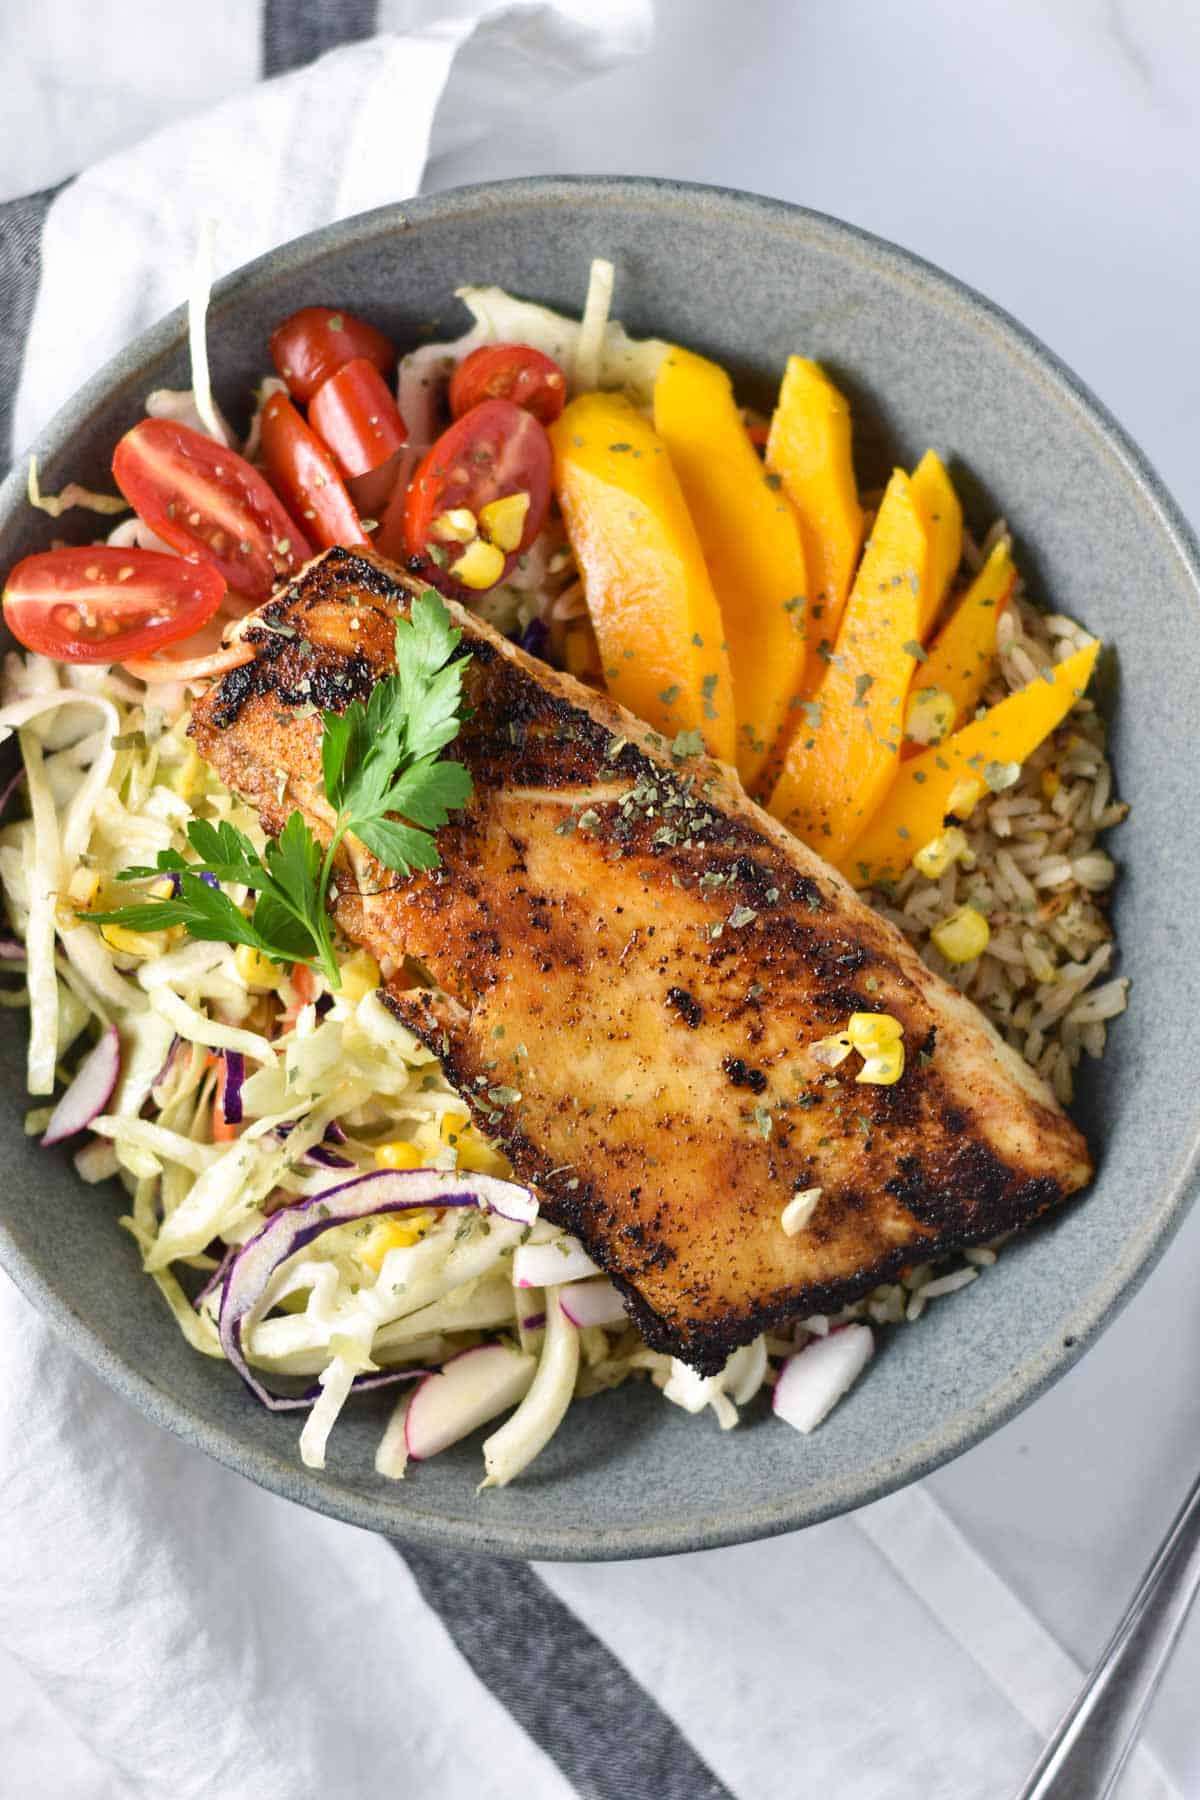 A gray bowl filled with slaw, tomatoes, mango, fish, and blackened fish.